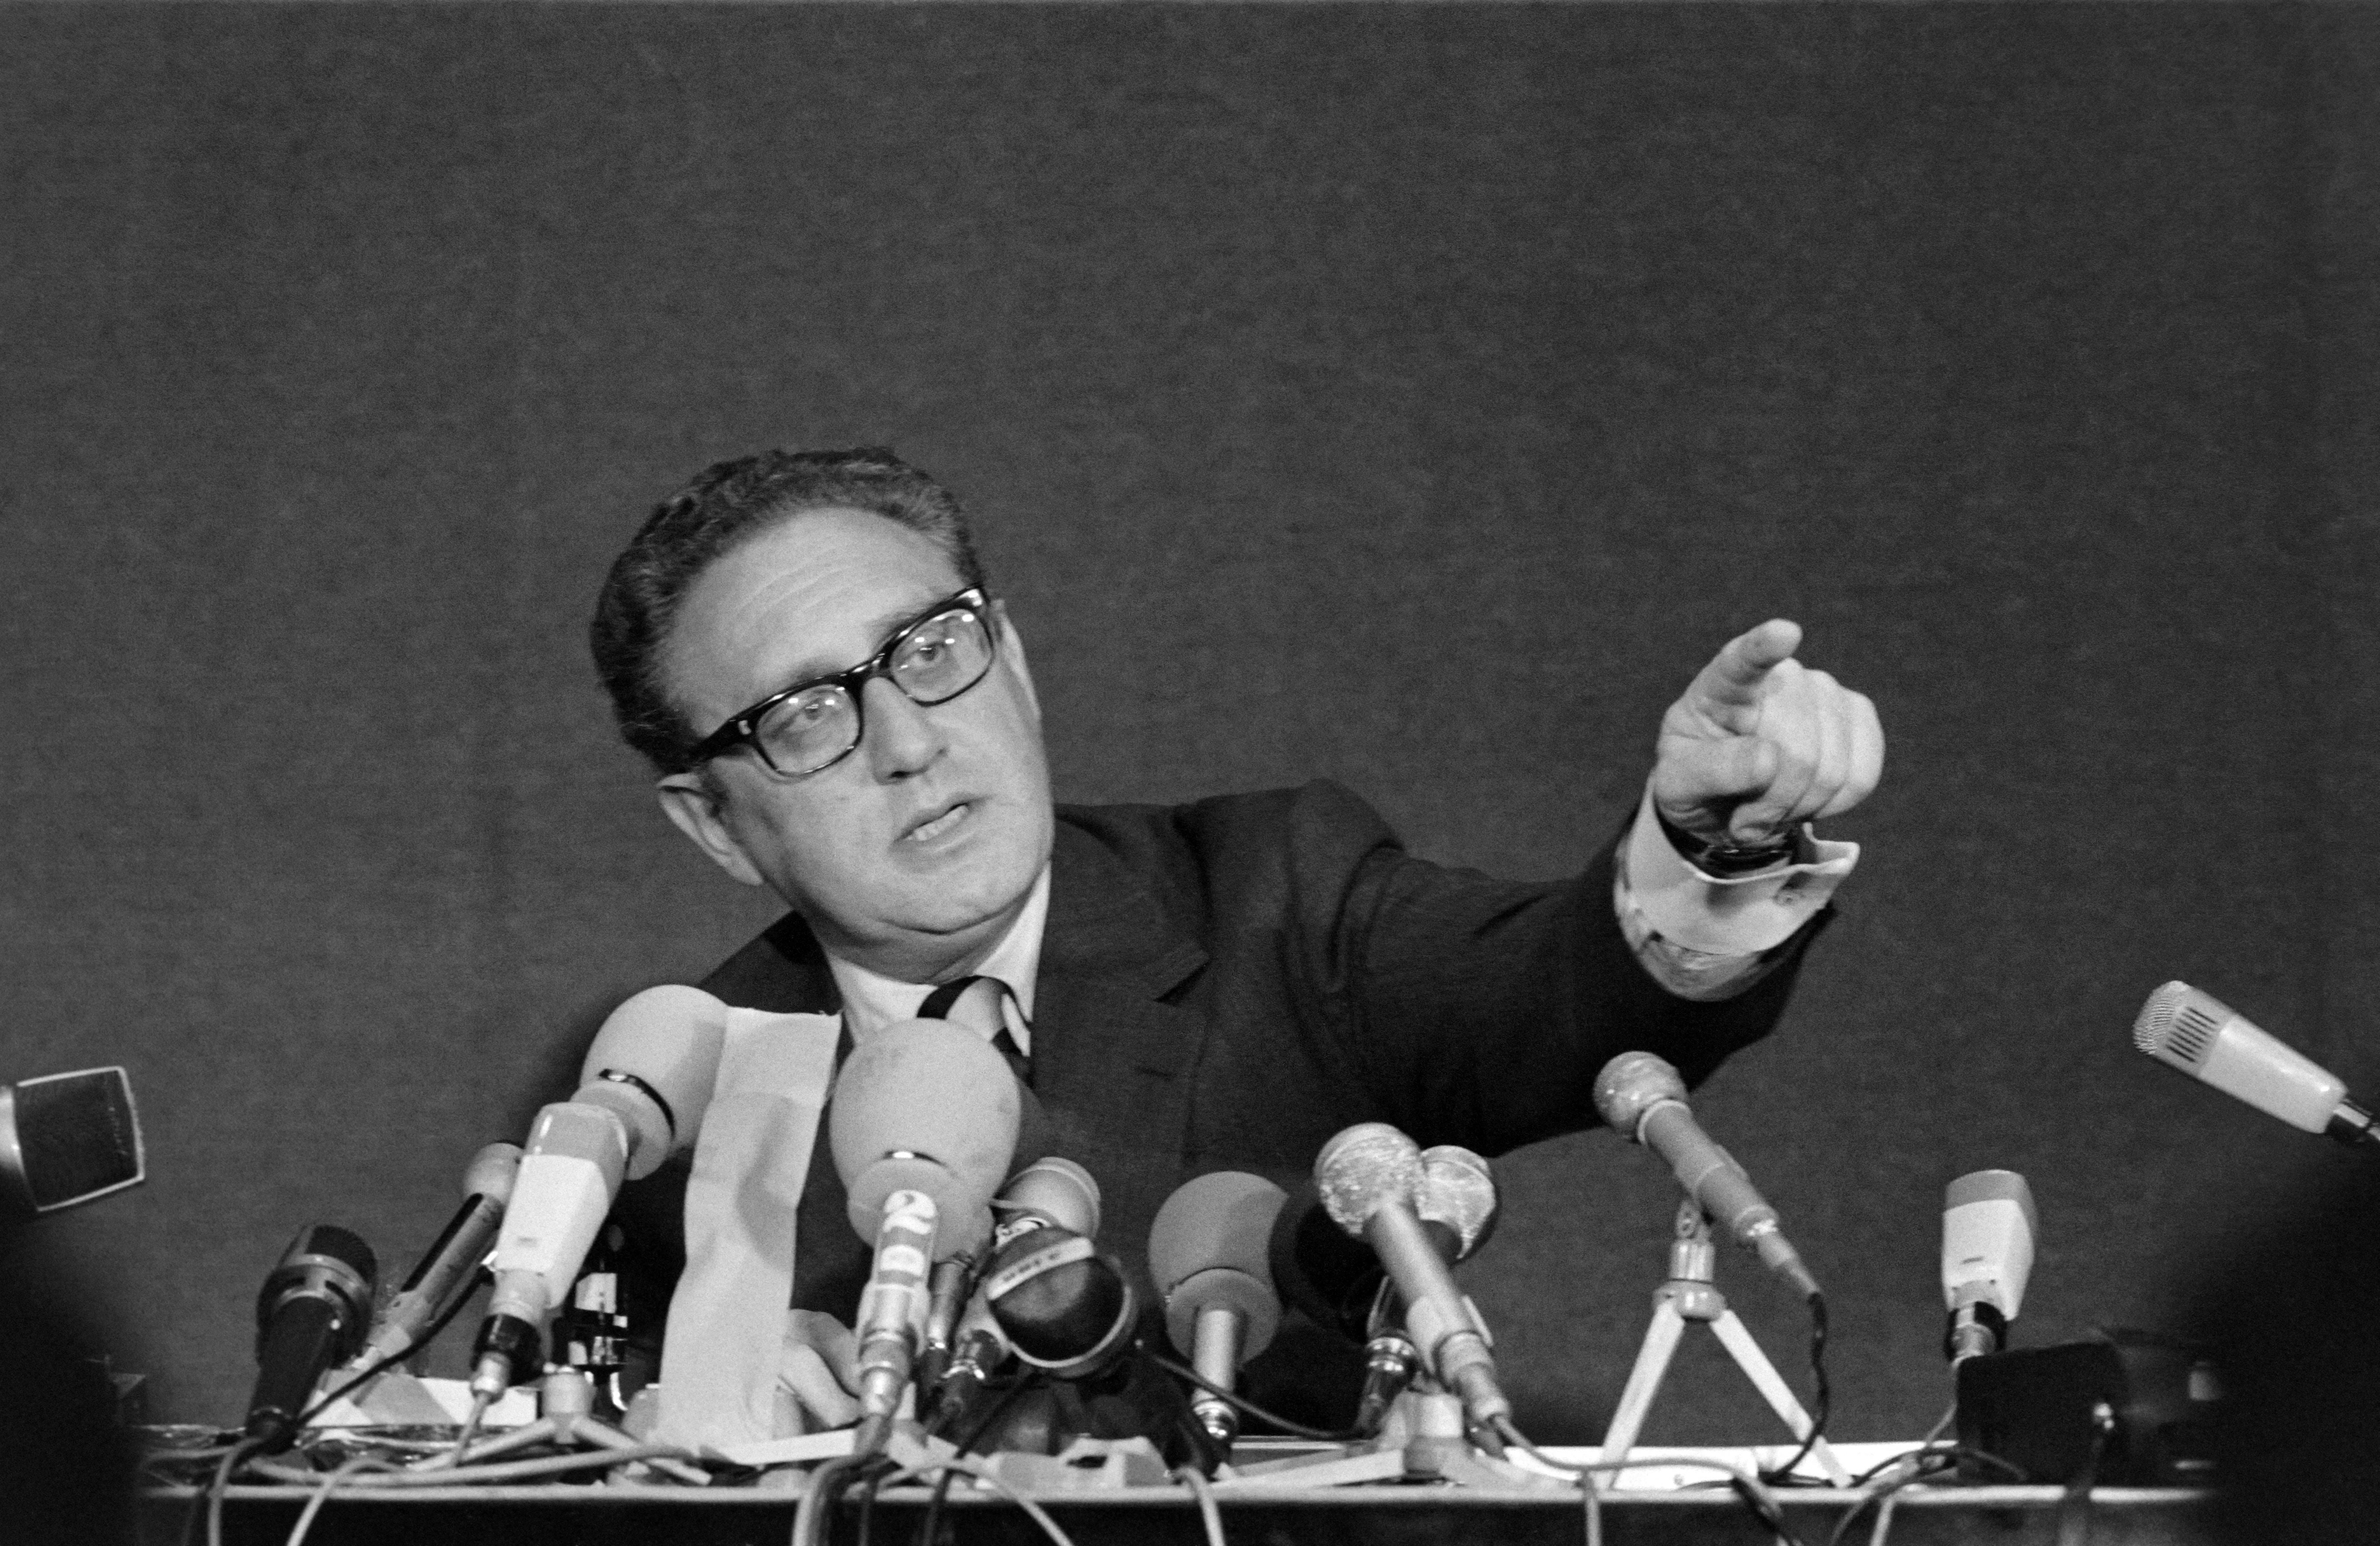 US president Nixon’s special advisor Henry Kissinger points during a press conference, after the final communique on the implementation of the Vietnam Peace Accords, signed by Kissinger and the North Vietnamese delegation leader, Le Duc Tho, on 13 June 1973 in Paris